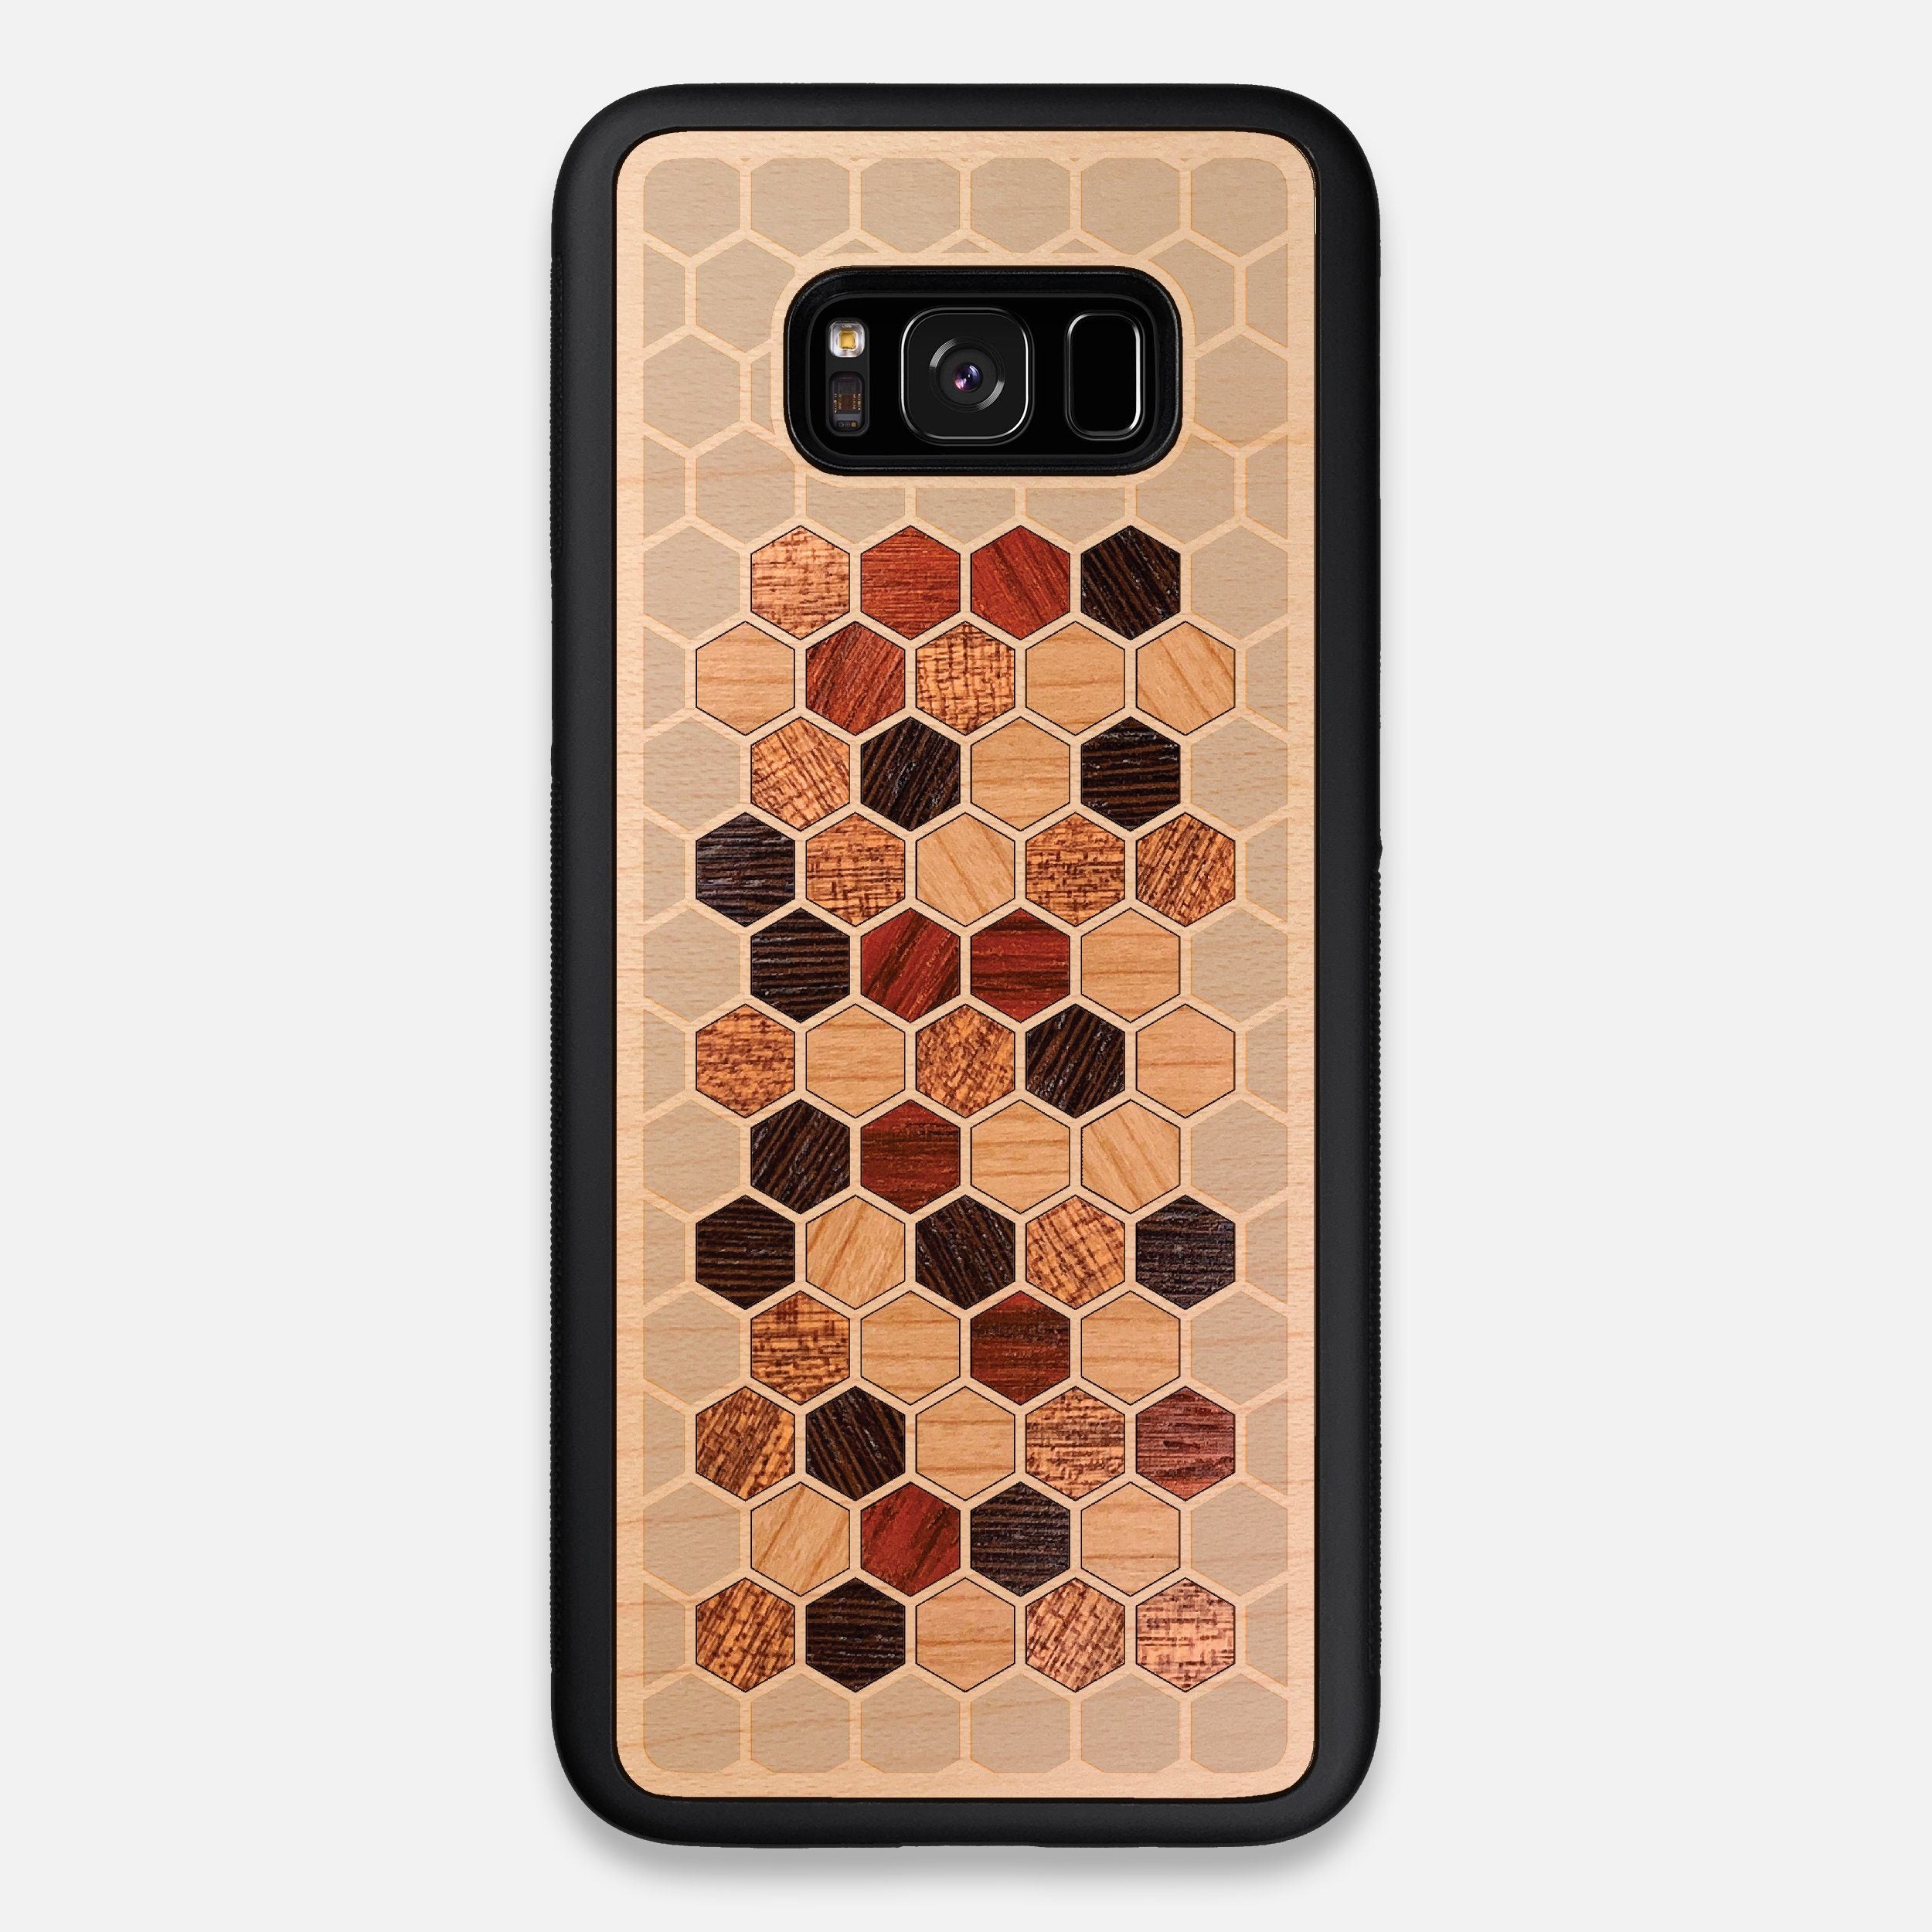 Front view of the Cellular Maple Wood Galaxy S8+ Case by Keyway Designs